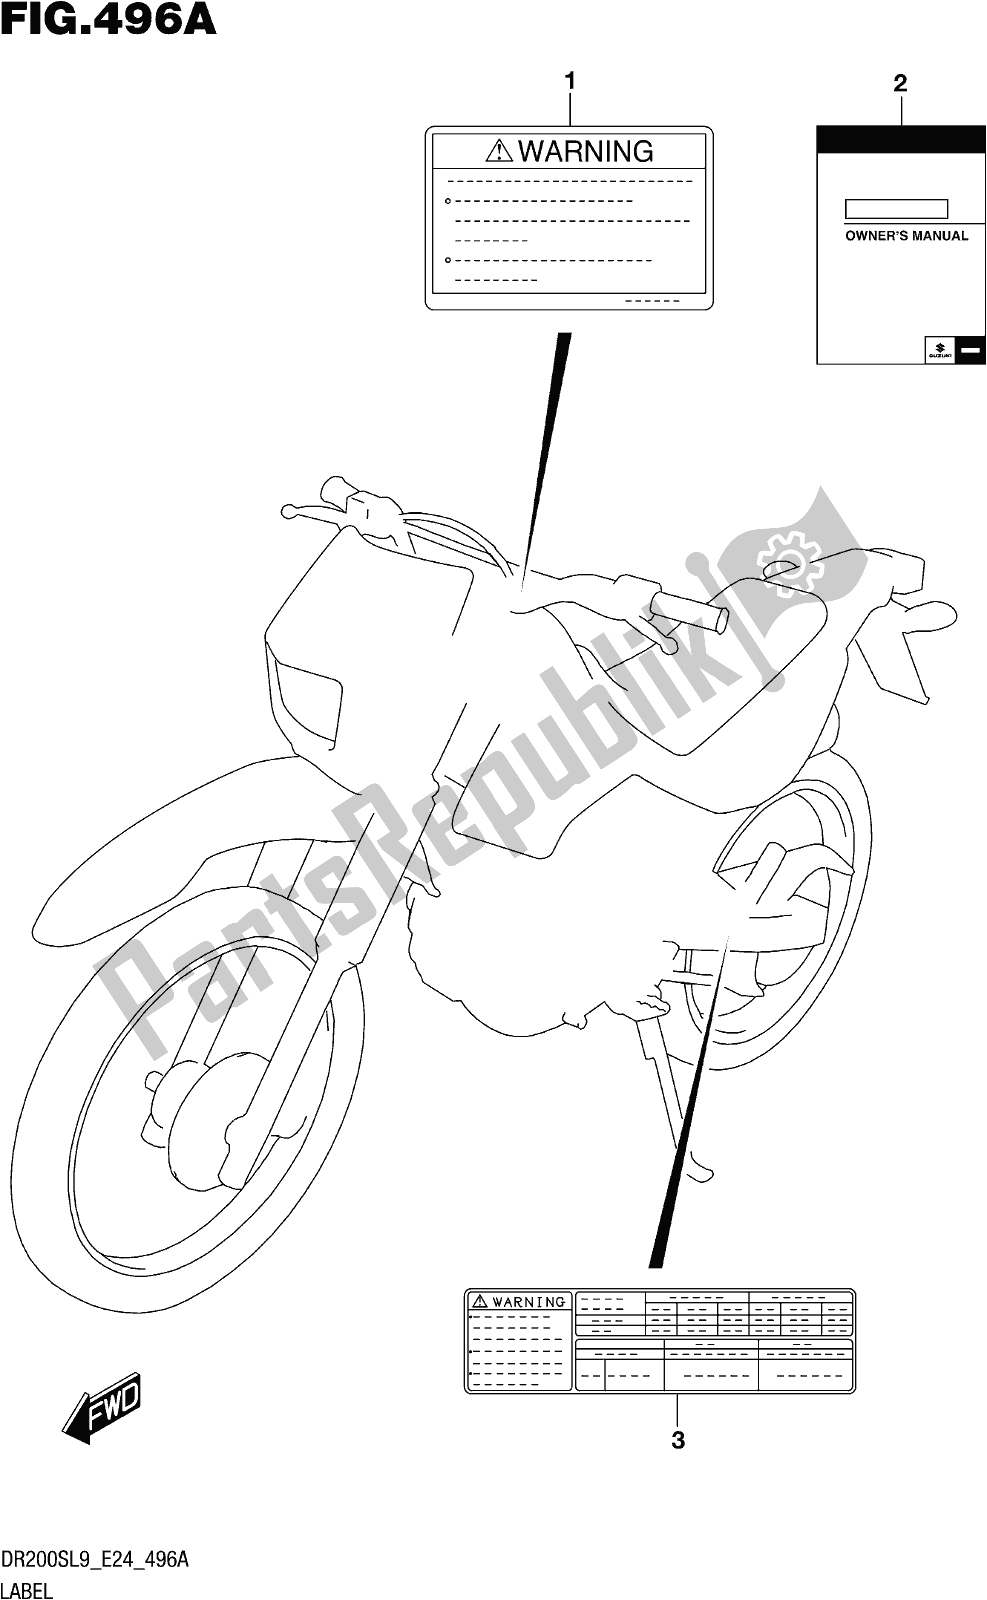 All parts for the Fig. 496a Label of the Suzuki DR 200S 2019